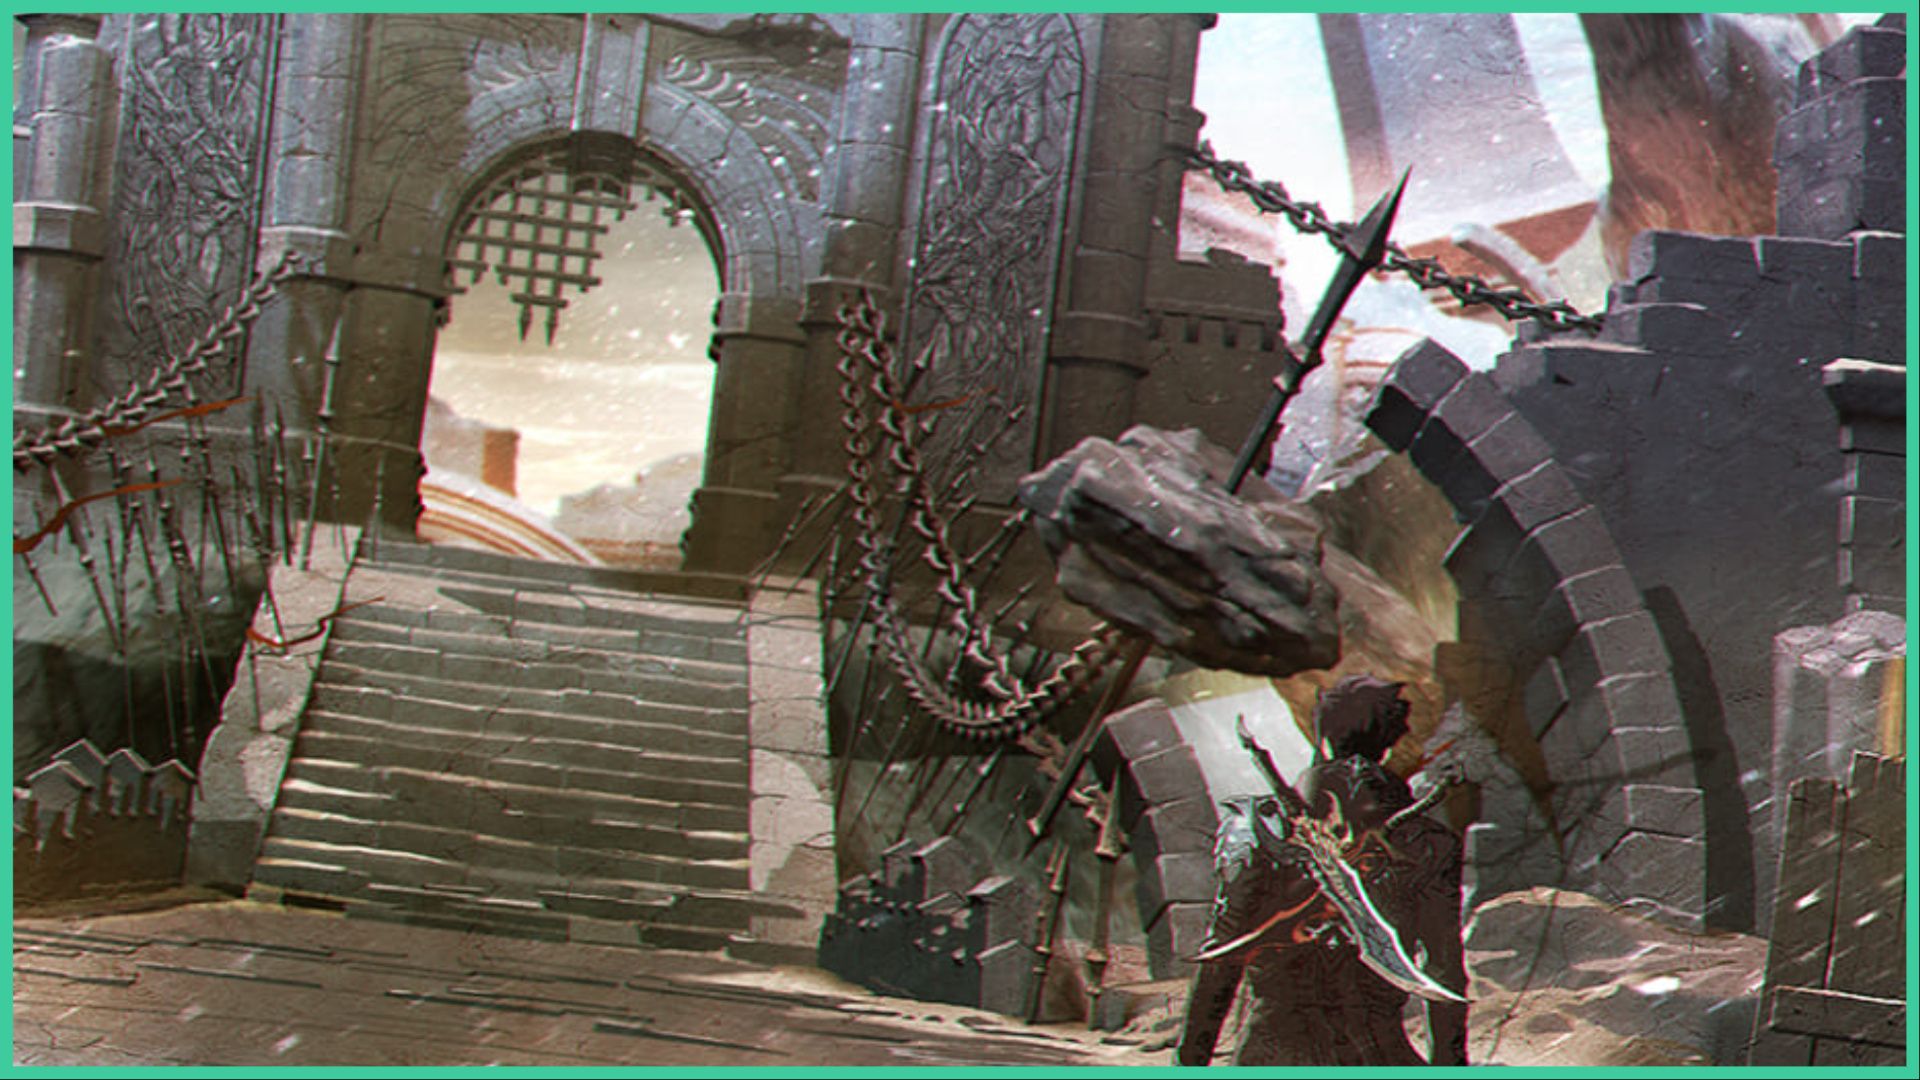 feature image for our solo leveling arise codes guide, the image is official art for the game, as jinwoo from the series walks toward a set of steps that lead through a broken gate archway, there stone debris and broken metal scattered around